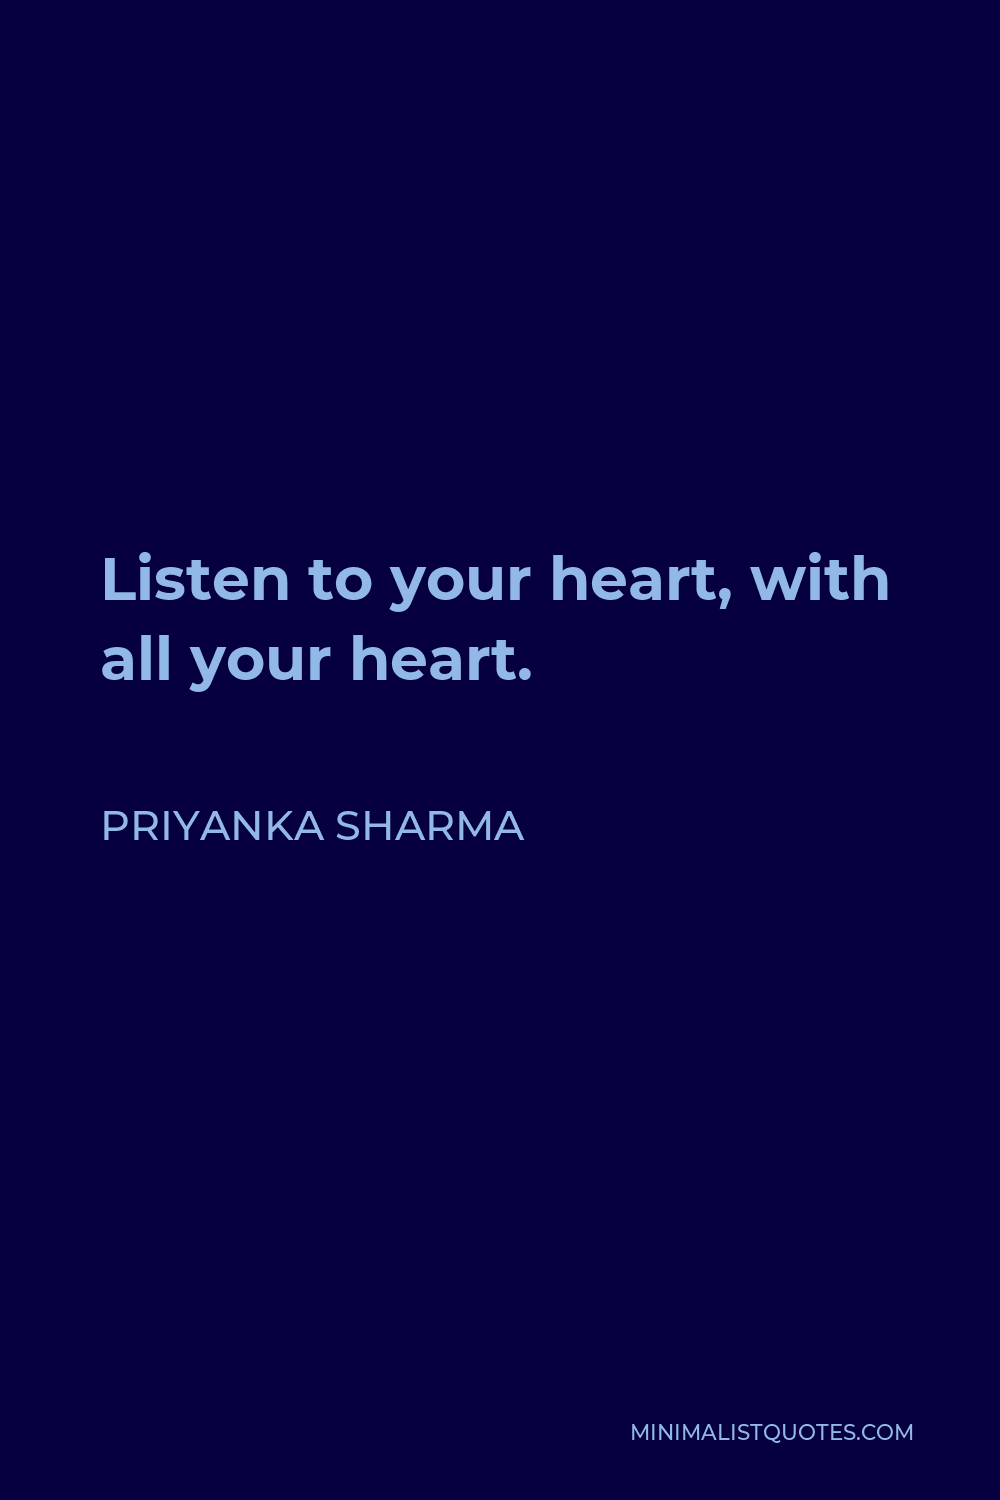 Priyanka Sharma Quote - Listen to your heart, with all your heart.